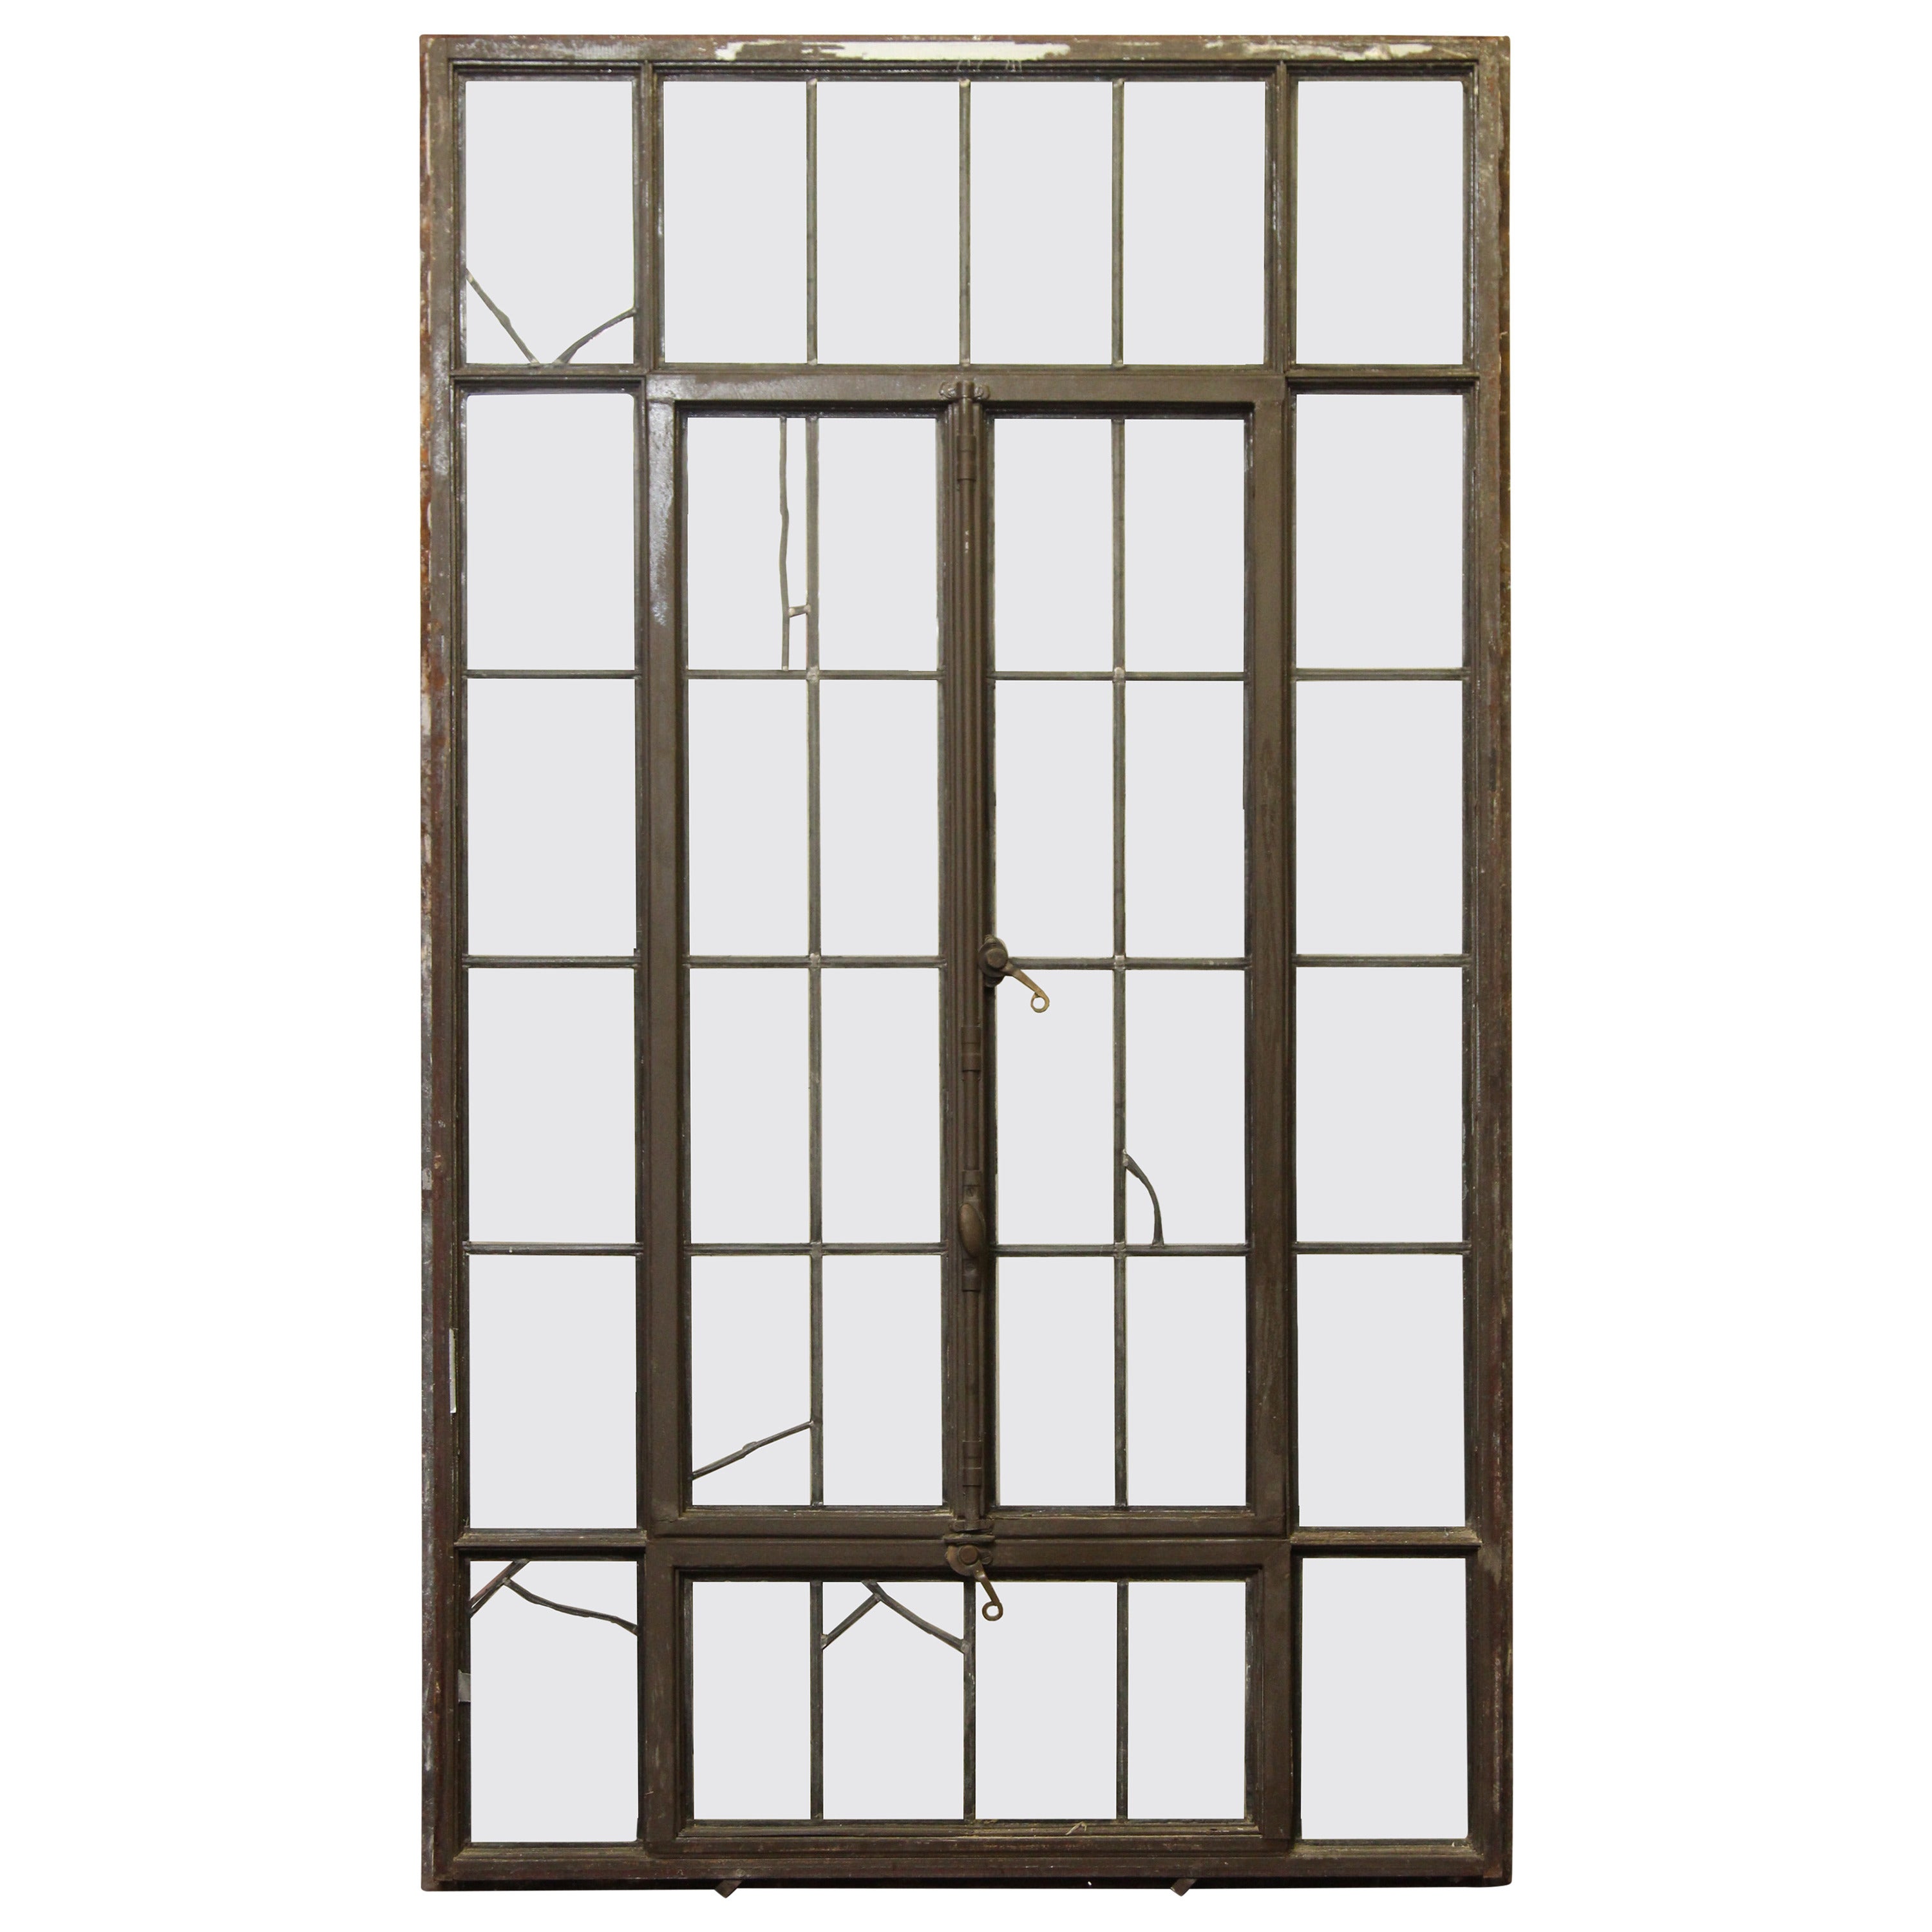 1905 Wisconsin Casement Steel Frame Window with Accents and Bronze Hardware